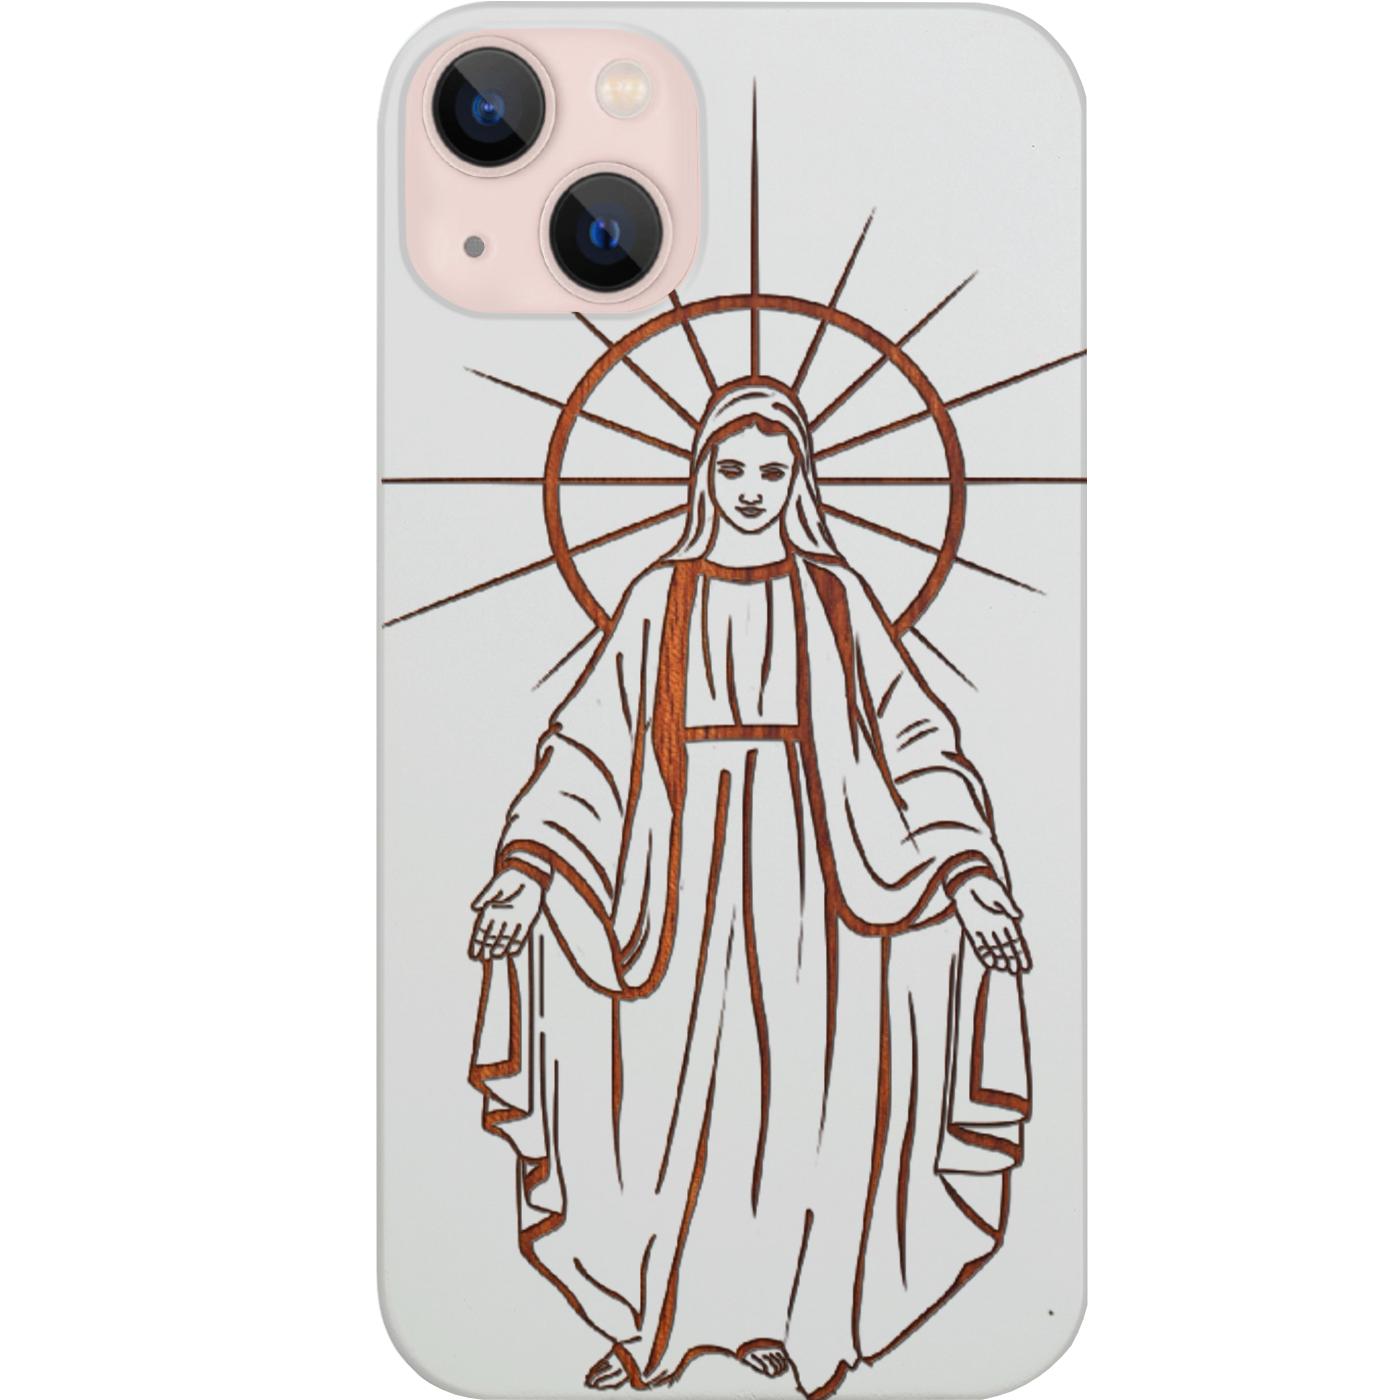 Mother Mary - Engraved Phone Case